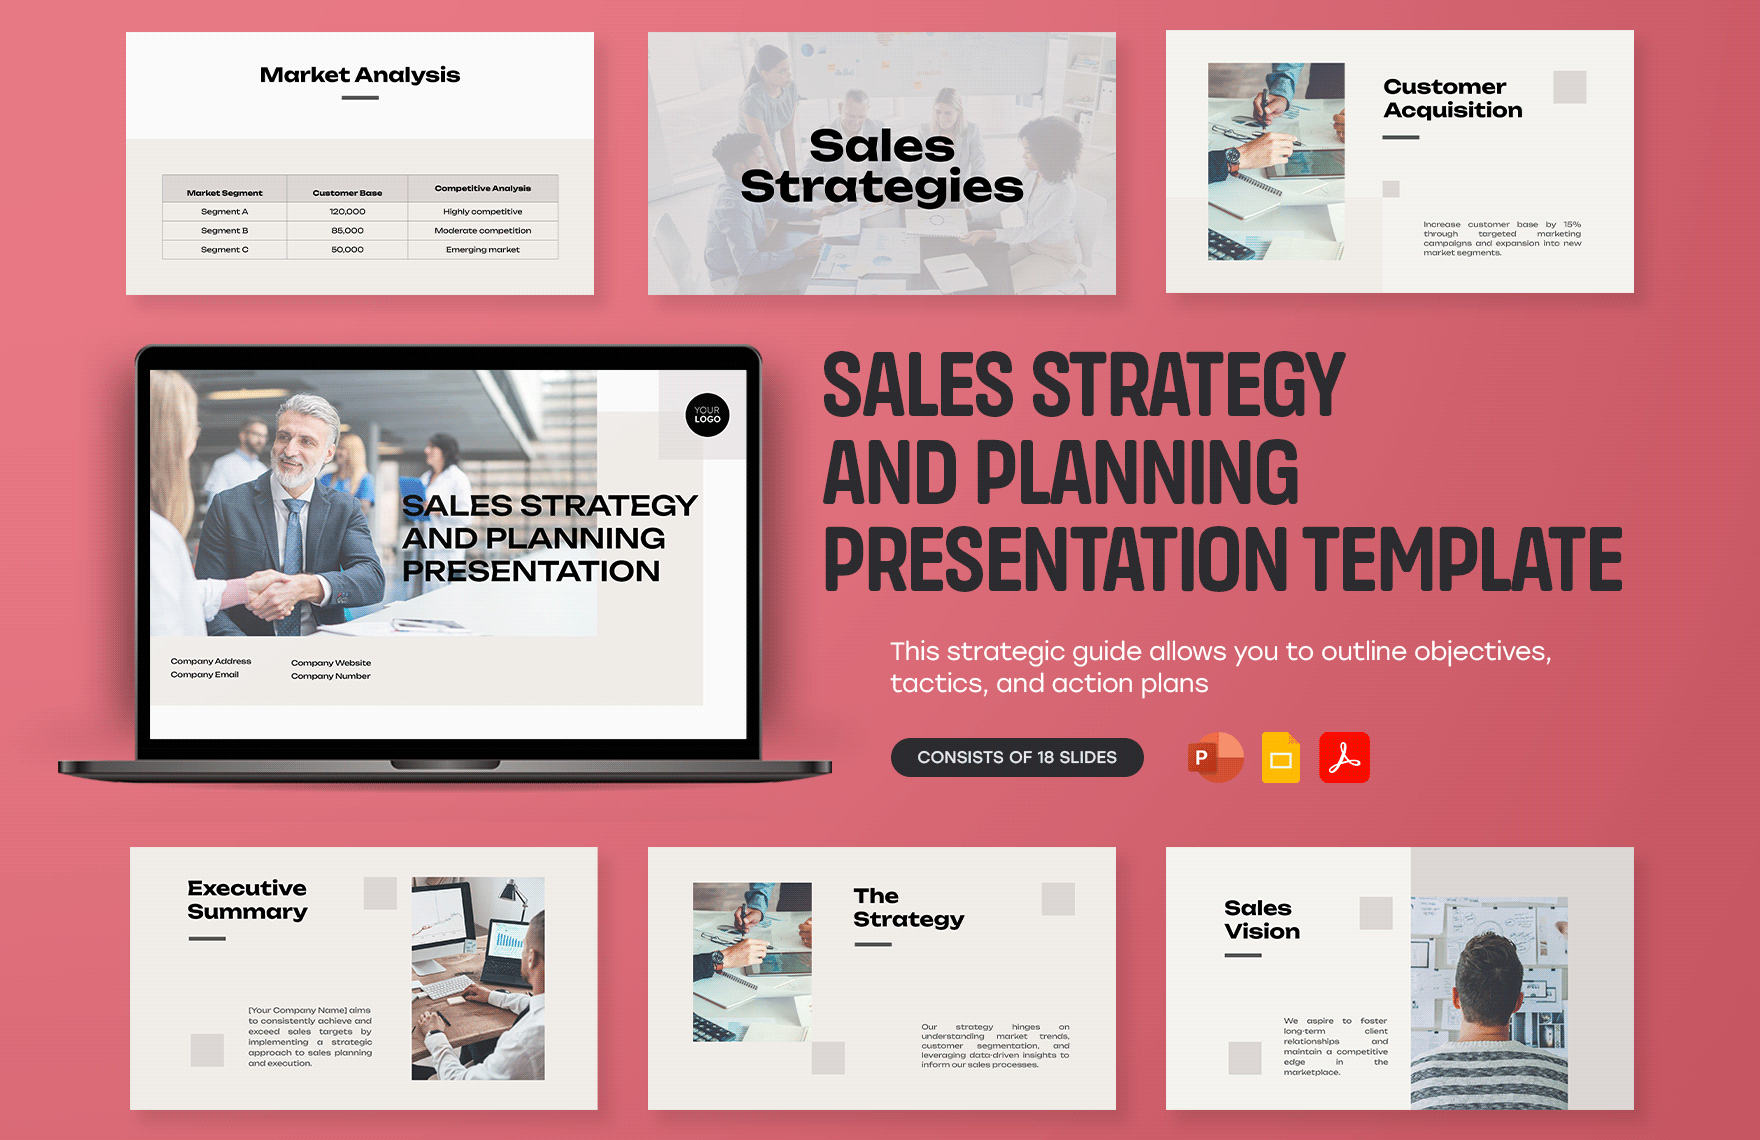 Sales Strategy and Planning Presentation Template